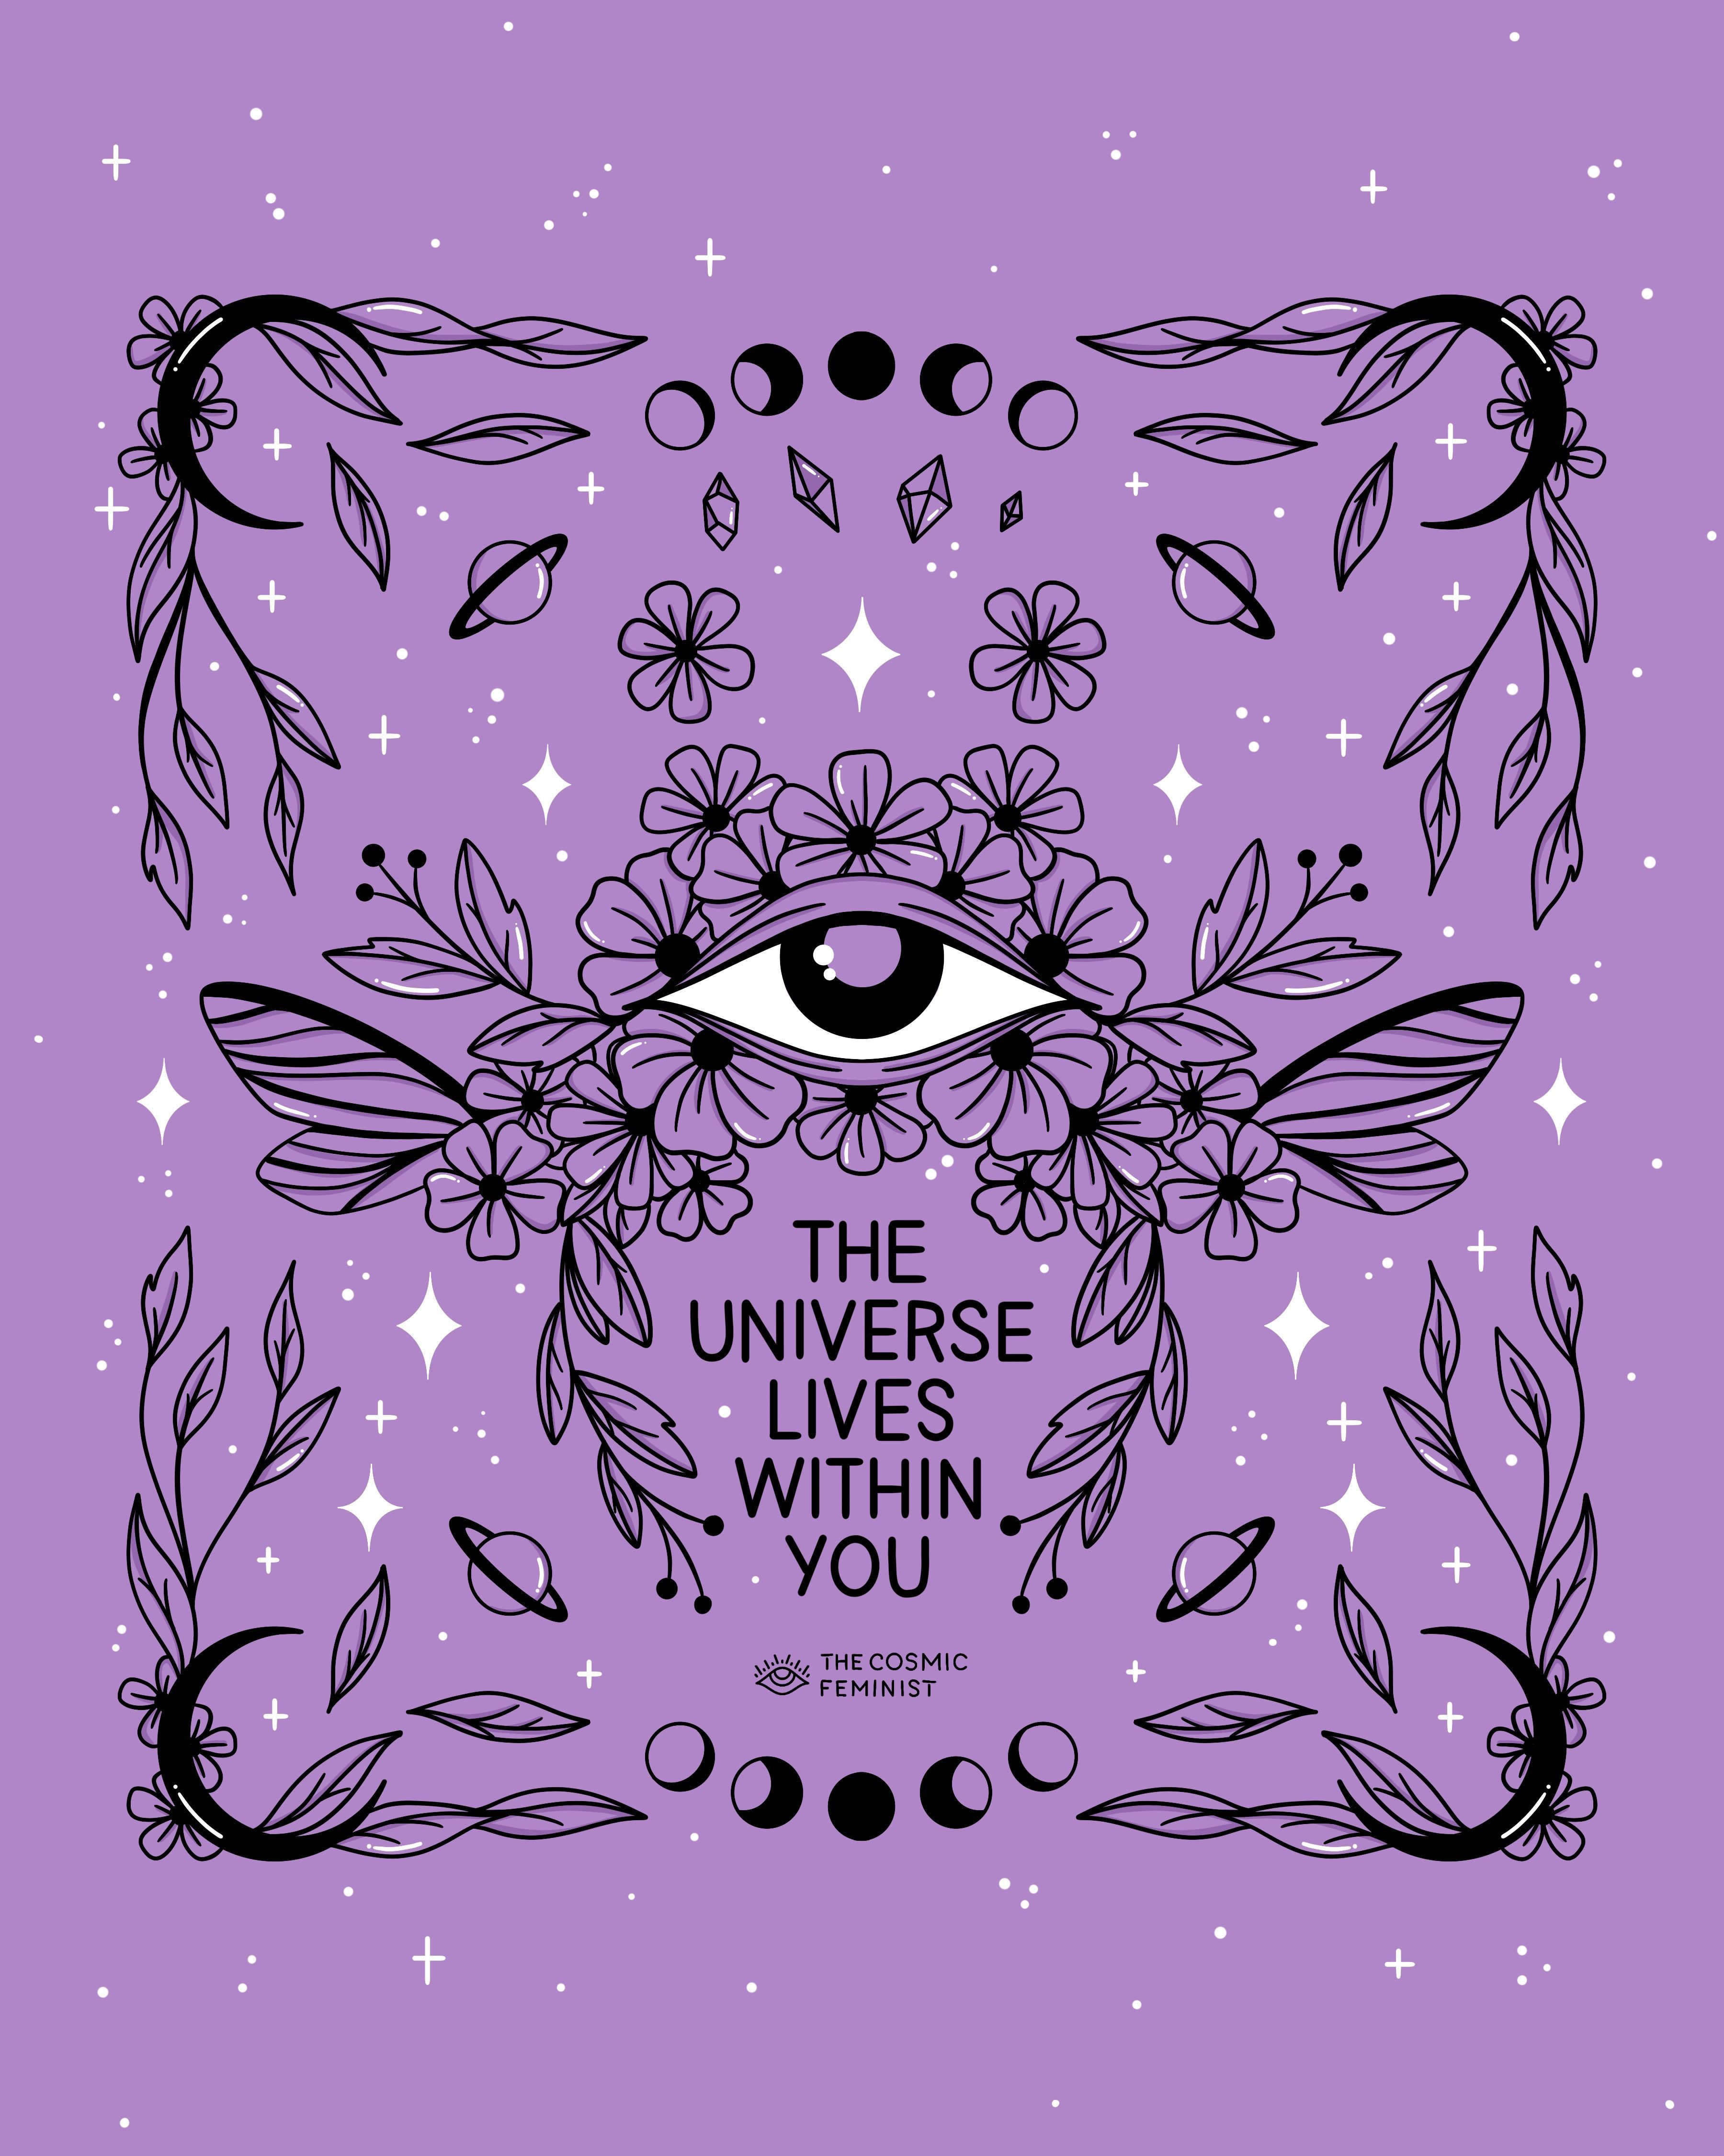 The Cosmic Feminist. Witchy wallpaper .ca